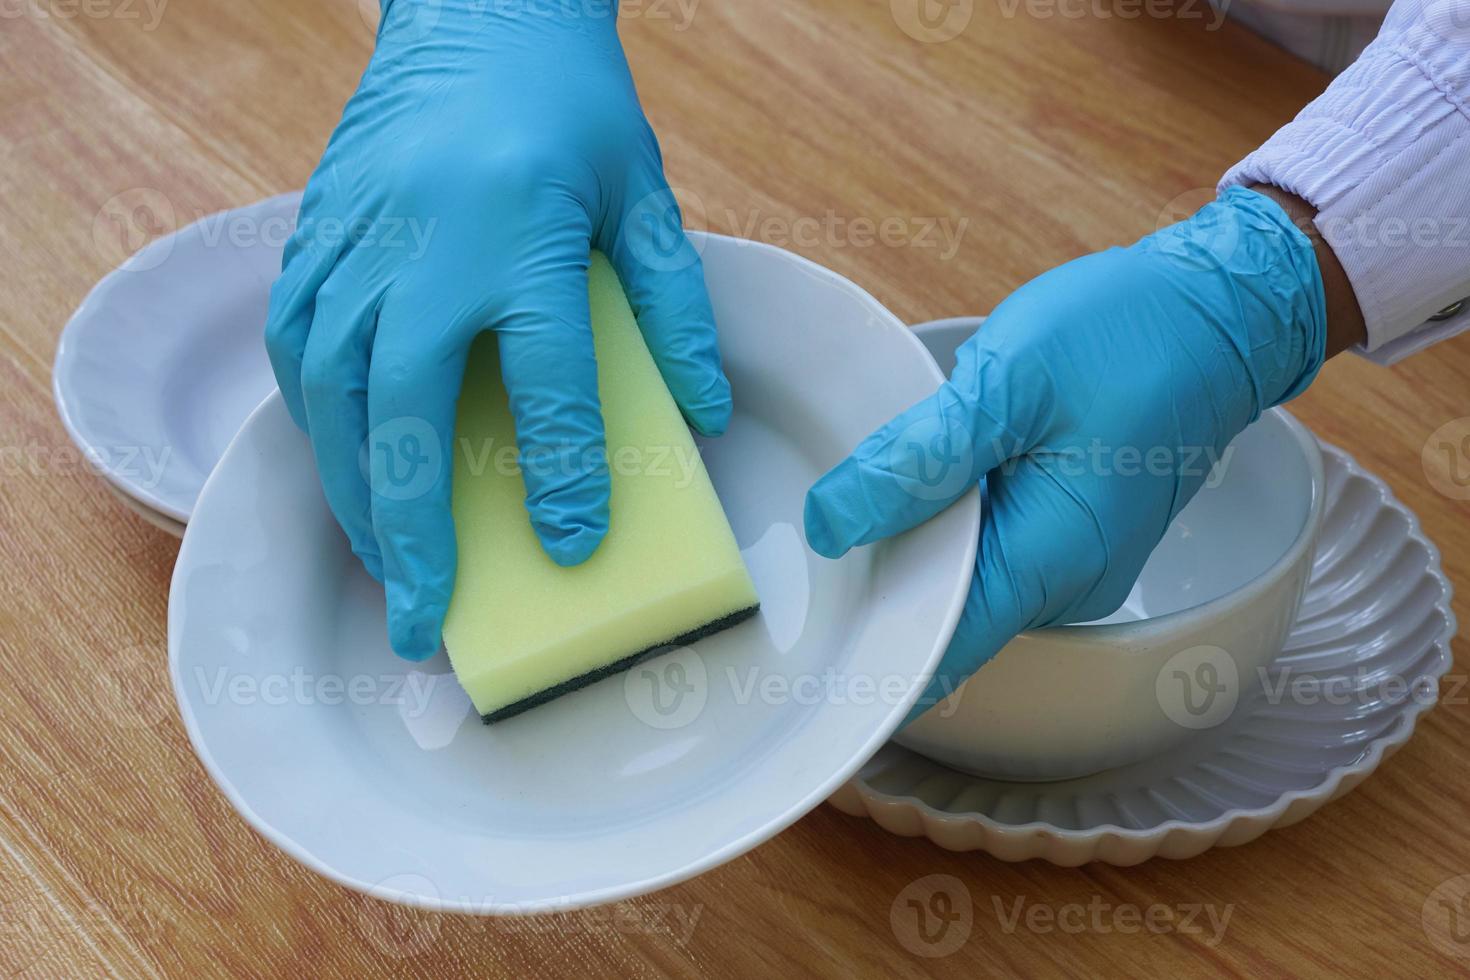 Hands use sponge scrubber to clean dish. Concept, daily chore, household cleaning kitchen utensils. Wear protective gloves to protect hands from chemical substances allergy. photo